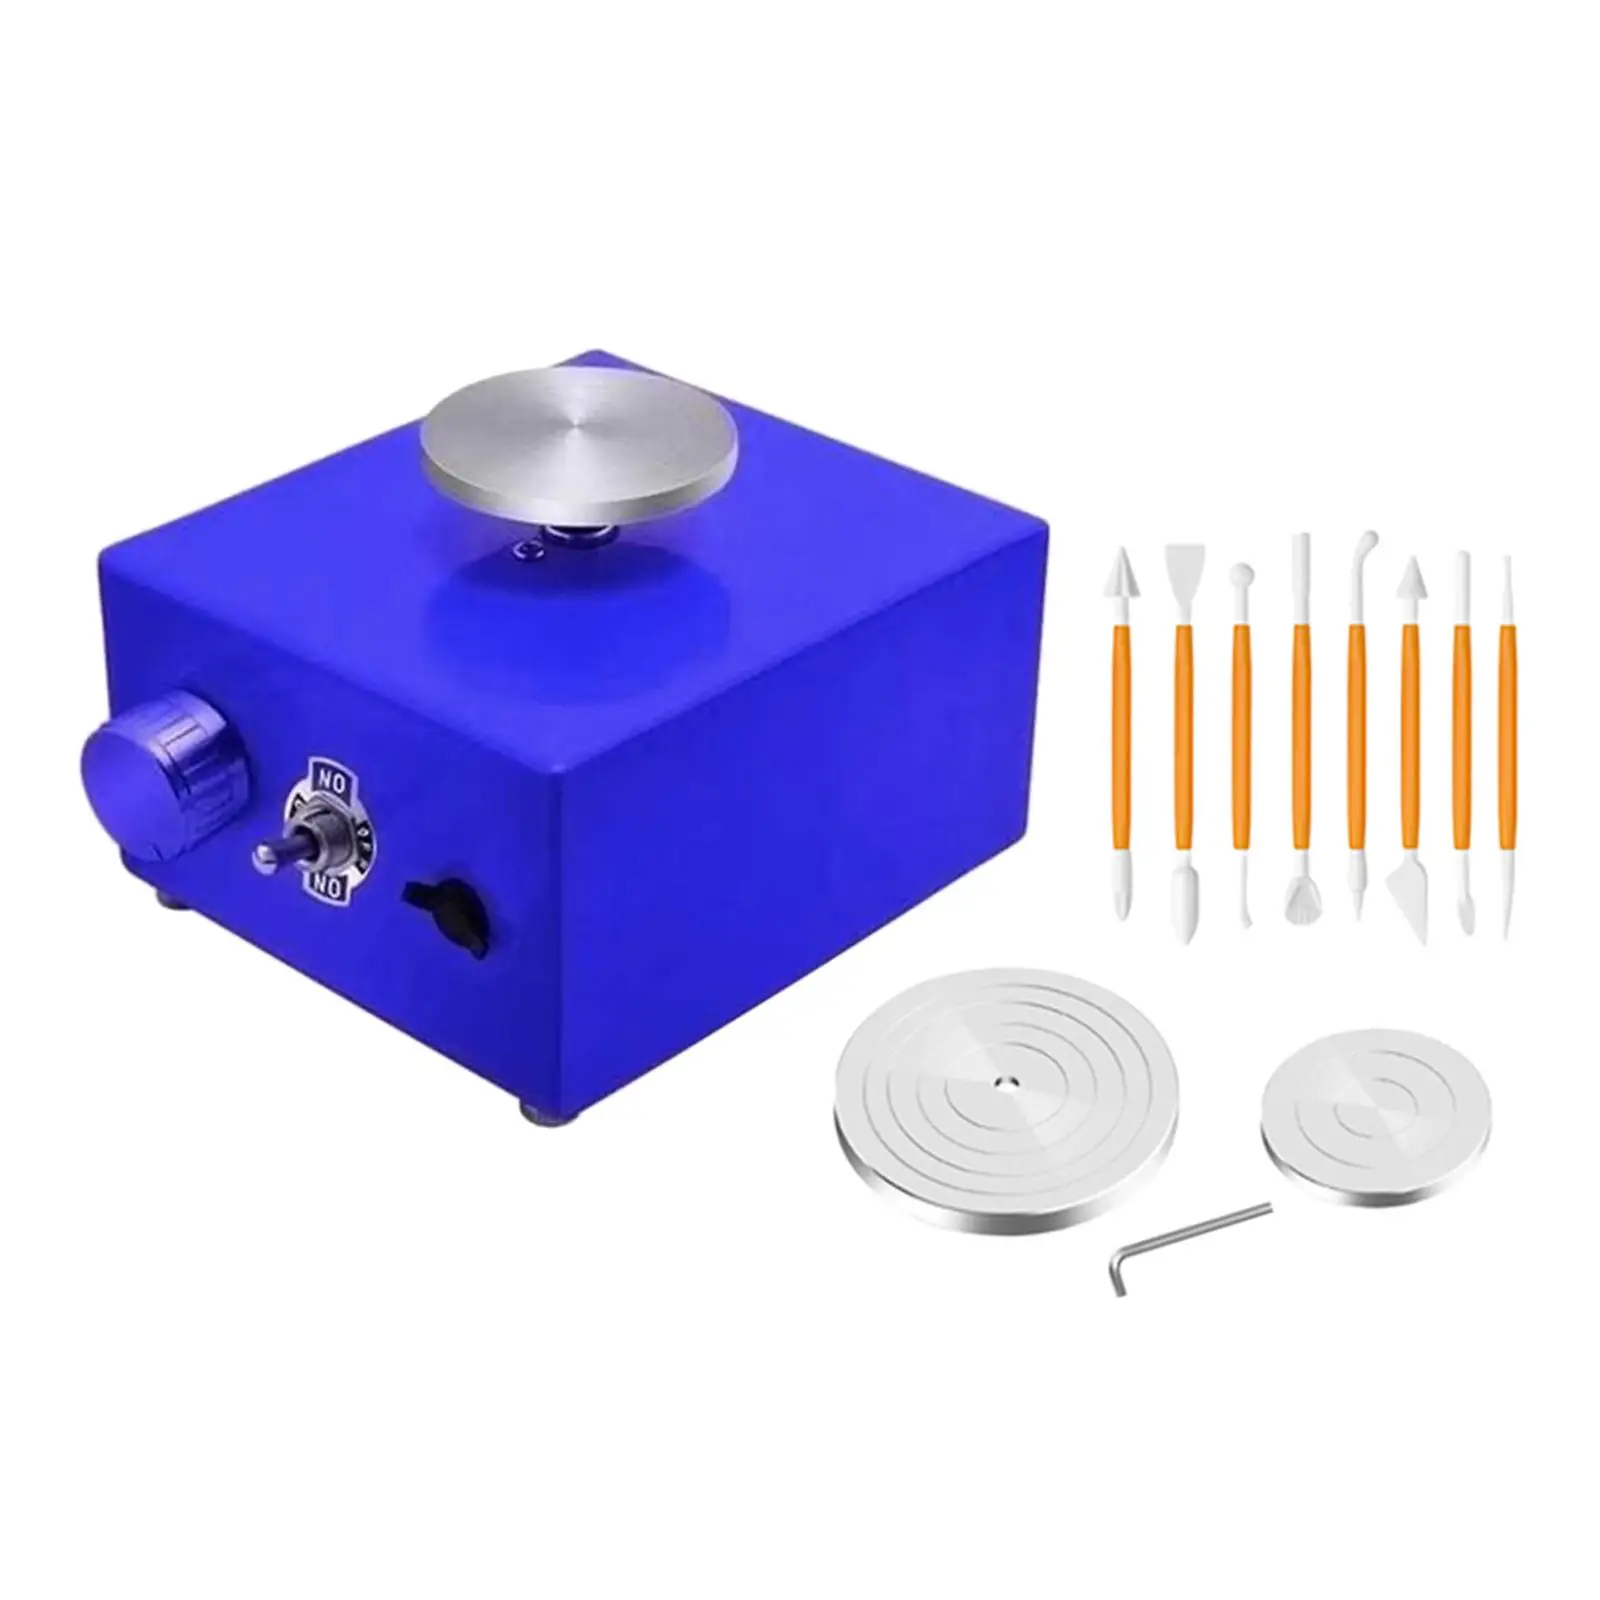 Electric Pottery Wheel Mini Turntable Wheel Tool Crafts DIY Clay Forming Ceramic Machine for Adults Kids Beginner Home Use